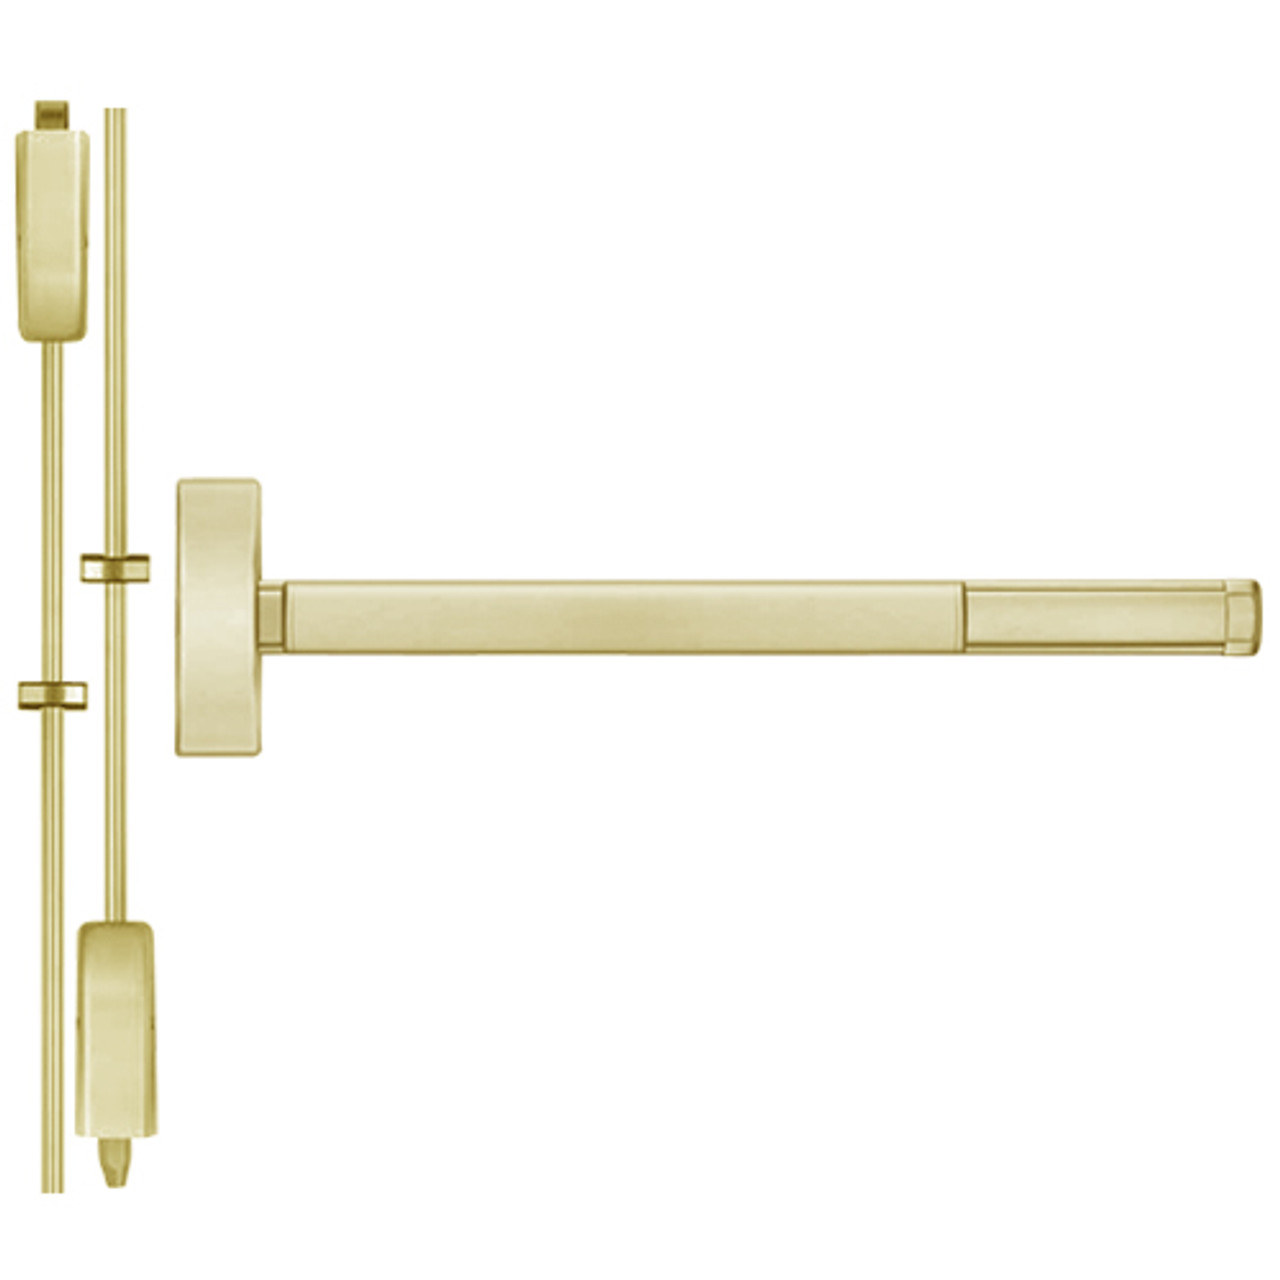 TSFL2205LBR-606-48 PHI 2200 Series Apex Surface Vertical Rod Device with Touchbar Monitoring Switch Prepped for Key Controls Thumb Piece in Satin Brass Finish